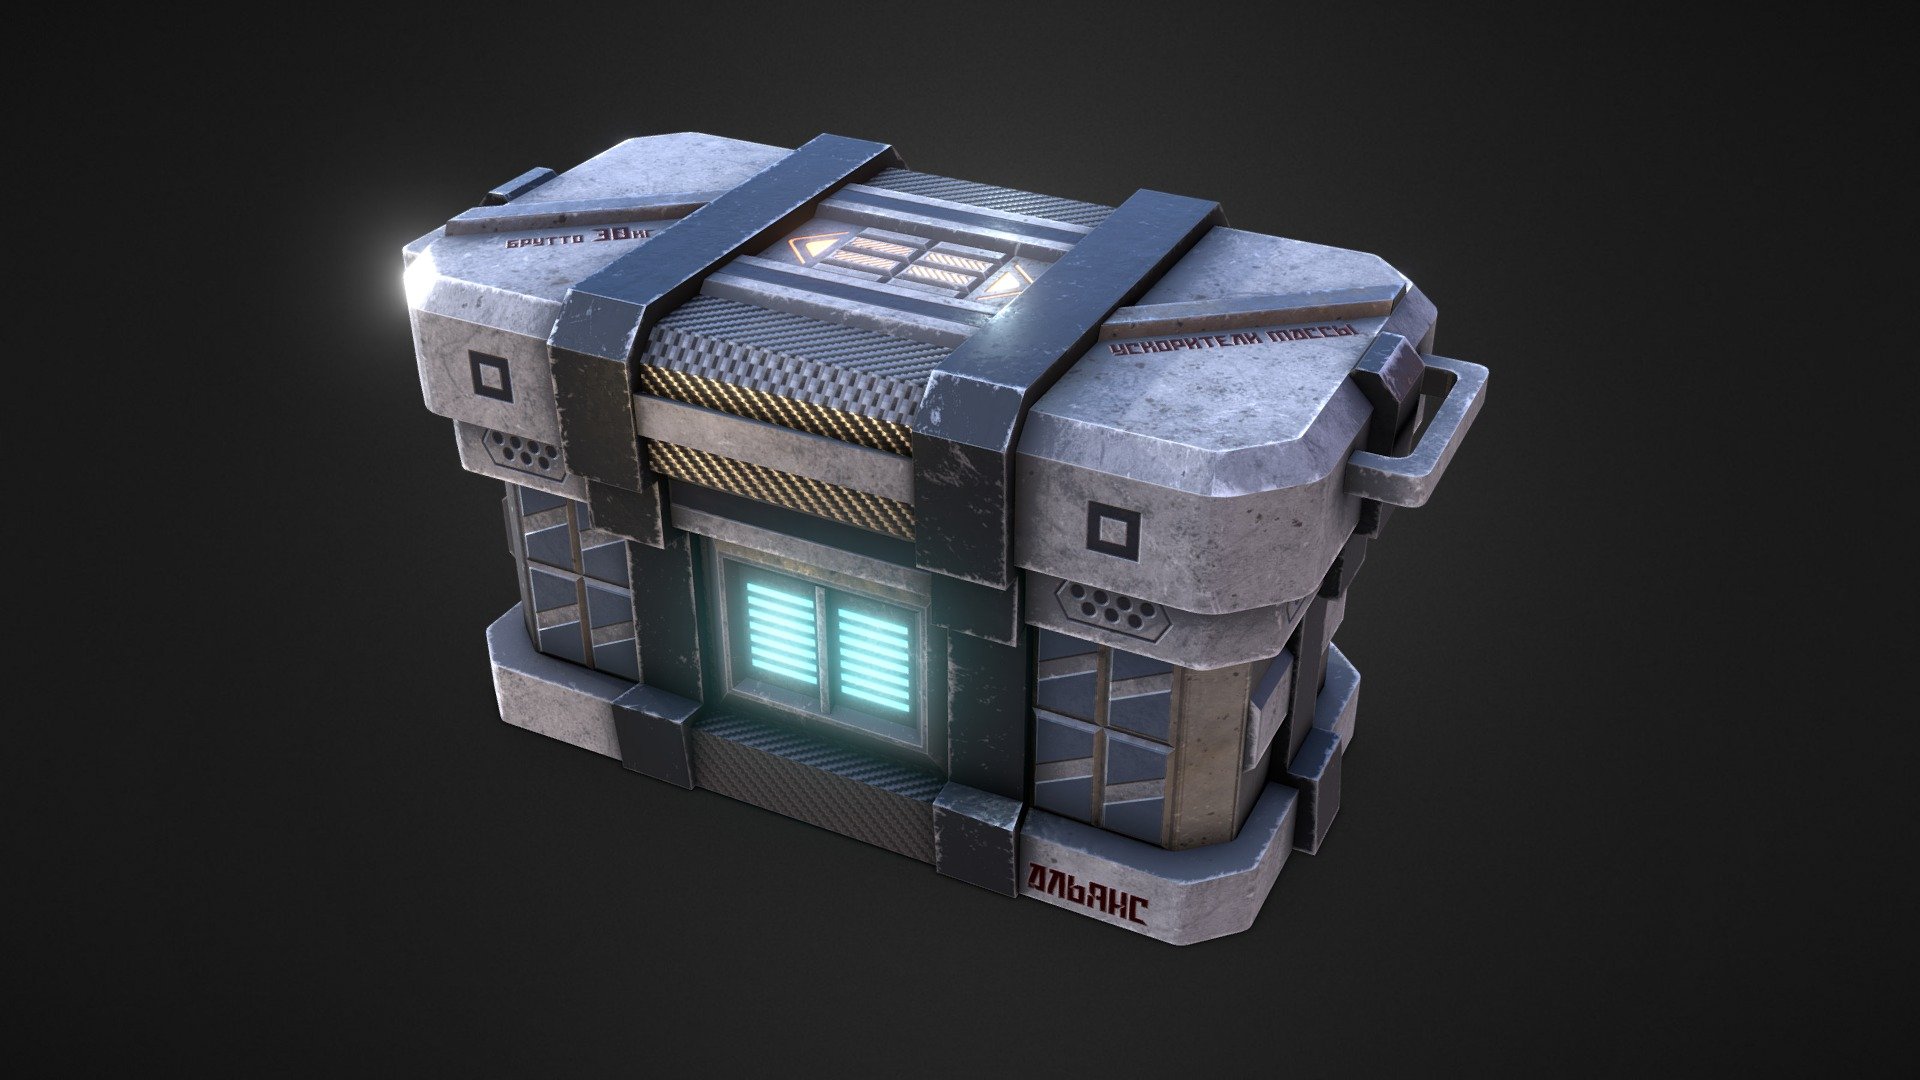 3D model of GAME READY Sci-Fi Prop box, inspired by Mass Effect.
The model was made with a texture resolution of 4096x4096.

1) THE MODEL CONSISTS OF:




2090 Polys;

2092 Tris;

6275 Edges;

1063 Verts;

4K Textures (AlbedoM, NormalM, RoughnessM, MetalM, IOR-M);

2) FILE PROPERTIES:




Version: 2007 (Only .DXF), 2011 (.FBX and .DWG), 2013;

Render: V-Ray 5.00;

Formats: Max 2013, 3DS, FBX, OBJ (MTL), ABC, DAE, DWG, DXF;

3) ADDITIONAL INFORMATION:

Software used:




3D modeling: 3ds Max 2016;

UV Mapping: 3ds Max 2016;

Painting / Texturing: Substance Painter &amp; Photoshop;

My system specifications:




CPU: Intel Core i7 4770k 3.5GHz;

GPU: GeForce GTX 760 2GB;

RAM: DDR3 8GB;OS: Windows 10;

In the zip file you will find the textures for the model.
Whole scene setuped and fully ready to render in Vray. All materials setuped in Vray.
I wish you happiness and health! - C3 - Sci-Fi Container 3 - 3D model by jordnu 3d model